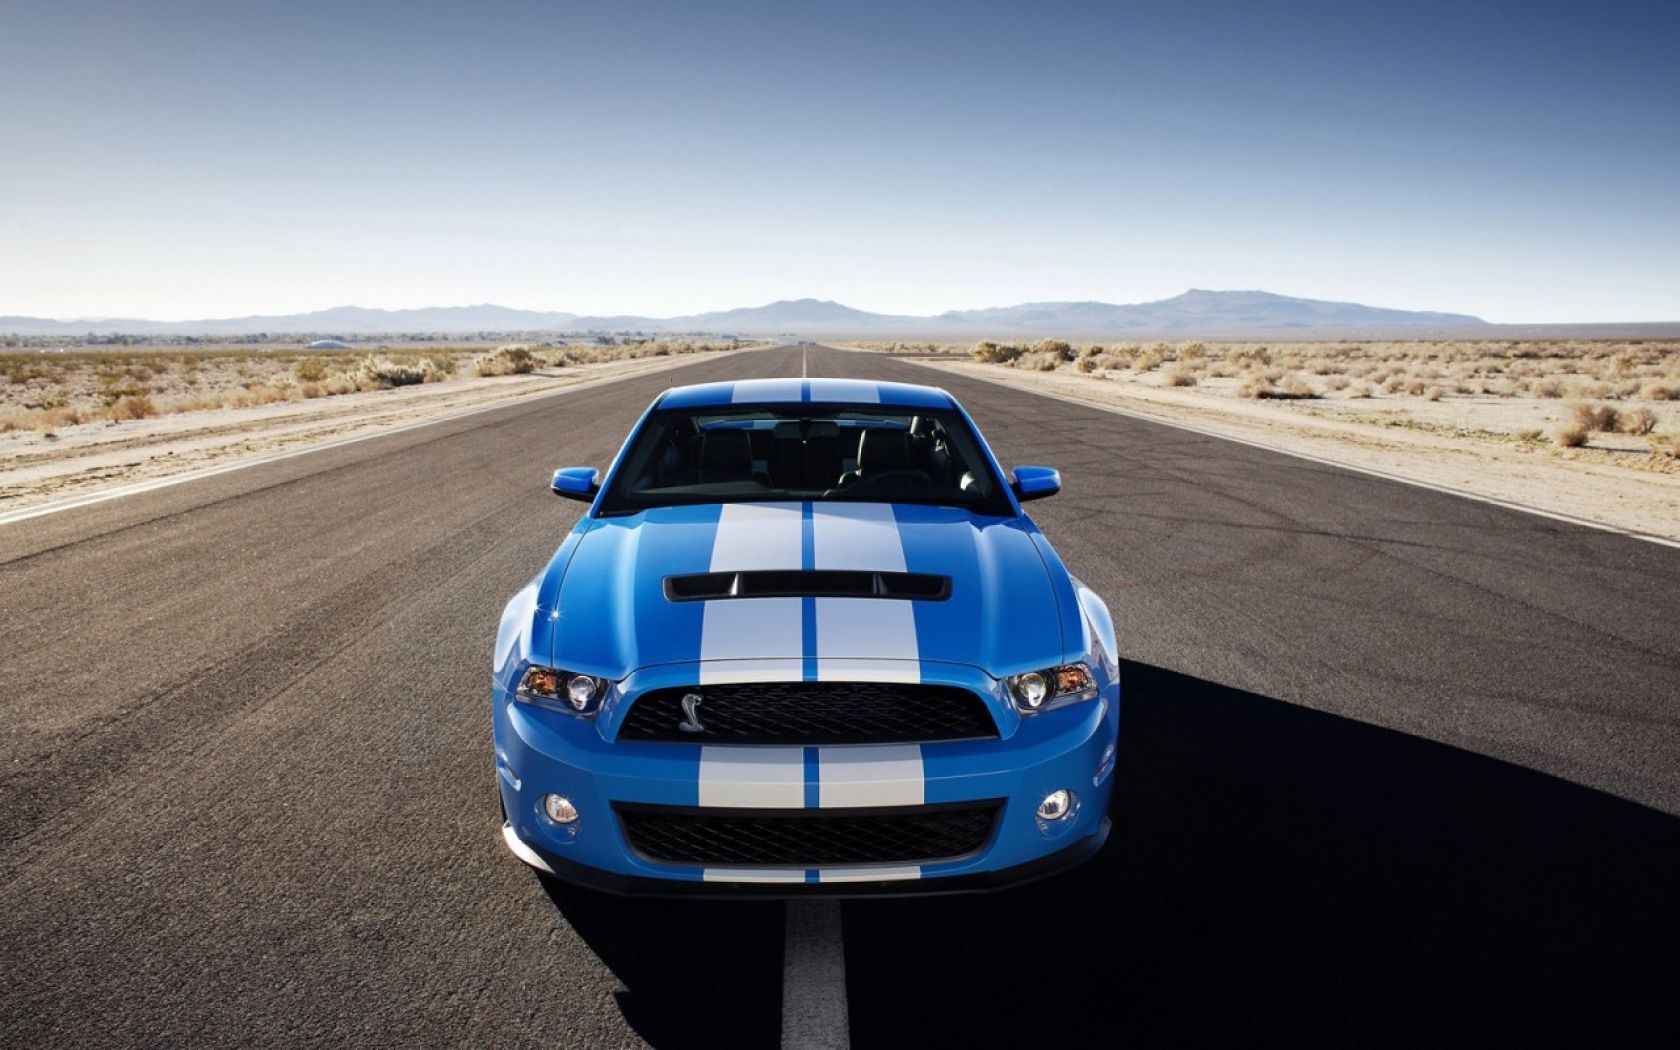 General 1680x1050 car Ford Mustang Shelby blue cars vehicle outdoors road asphalt landscape Ford Shelby Ford Mustang S-197 II Ford Mustang racing stripes American cars